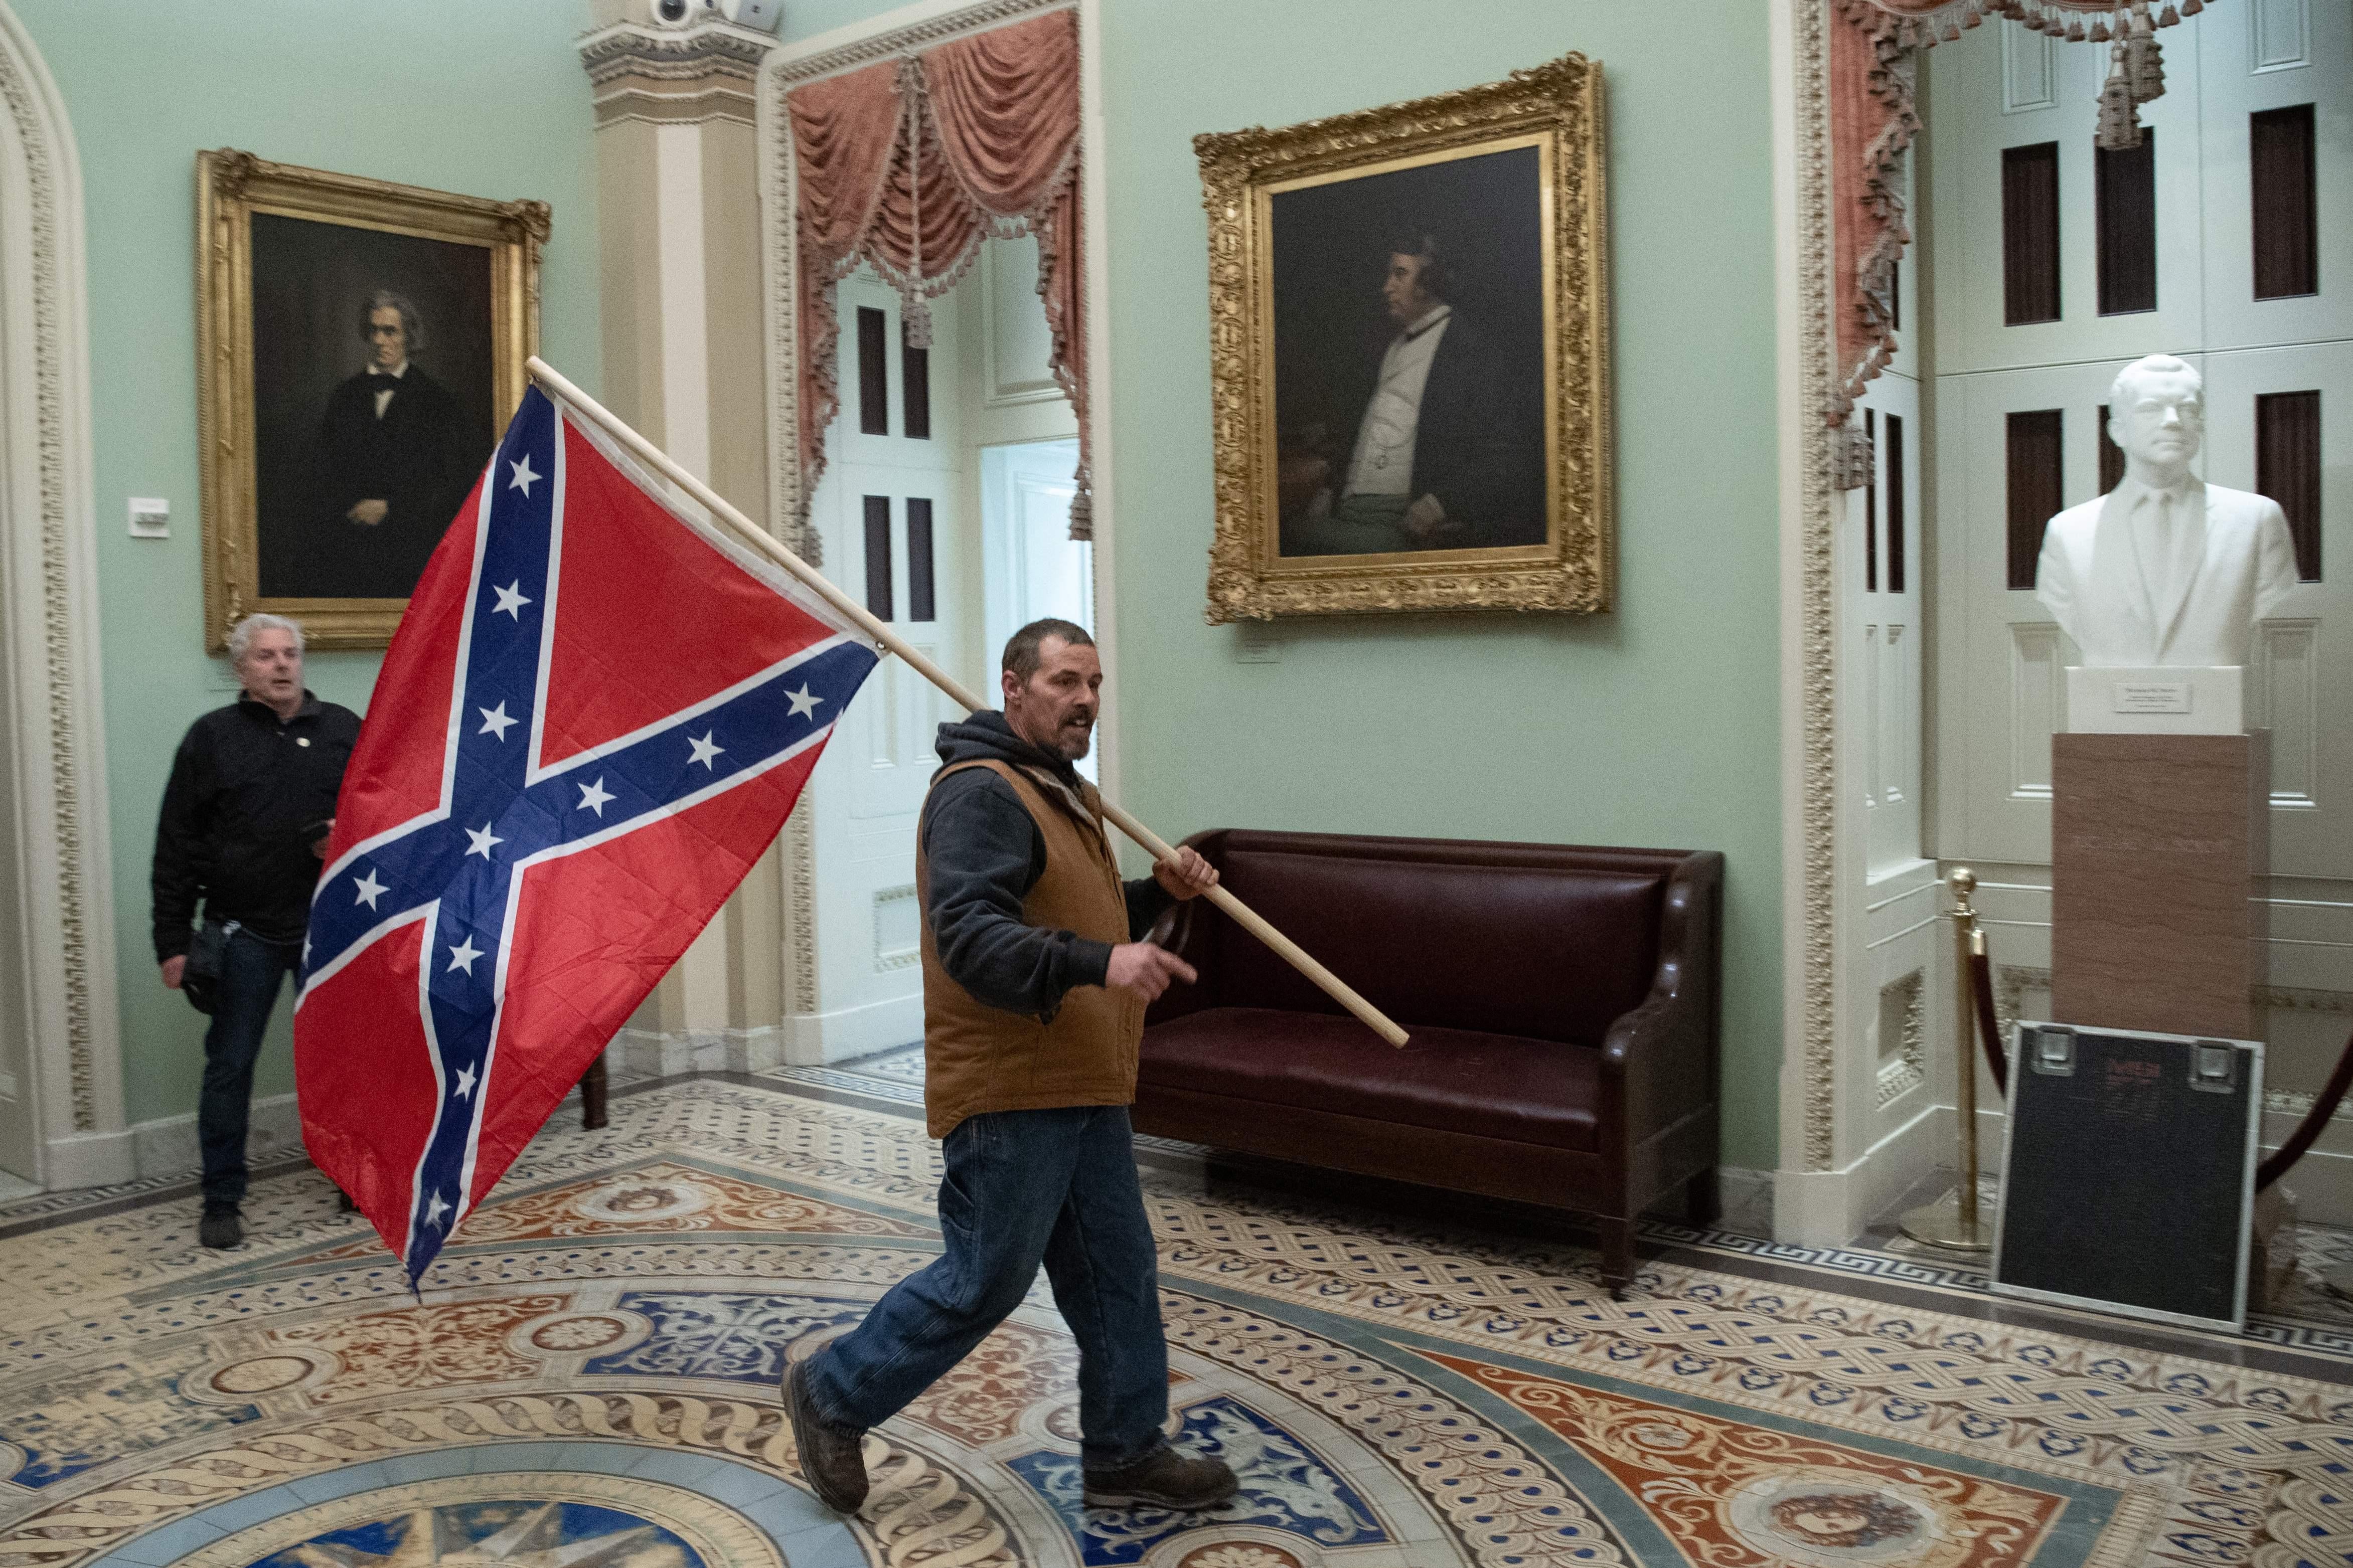 A man carries a Confederate flag through a hallway inside the Capitol